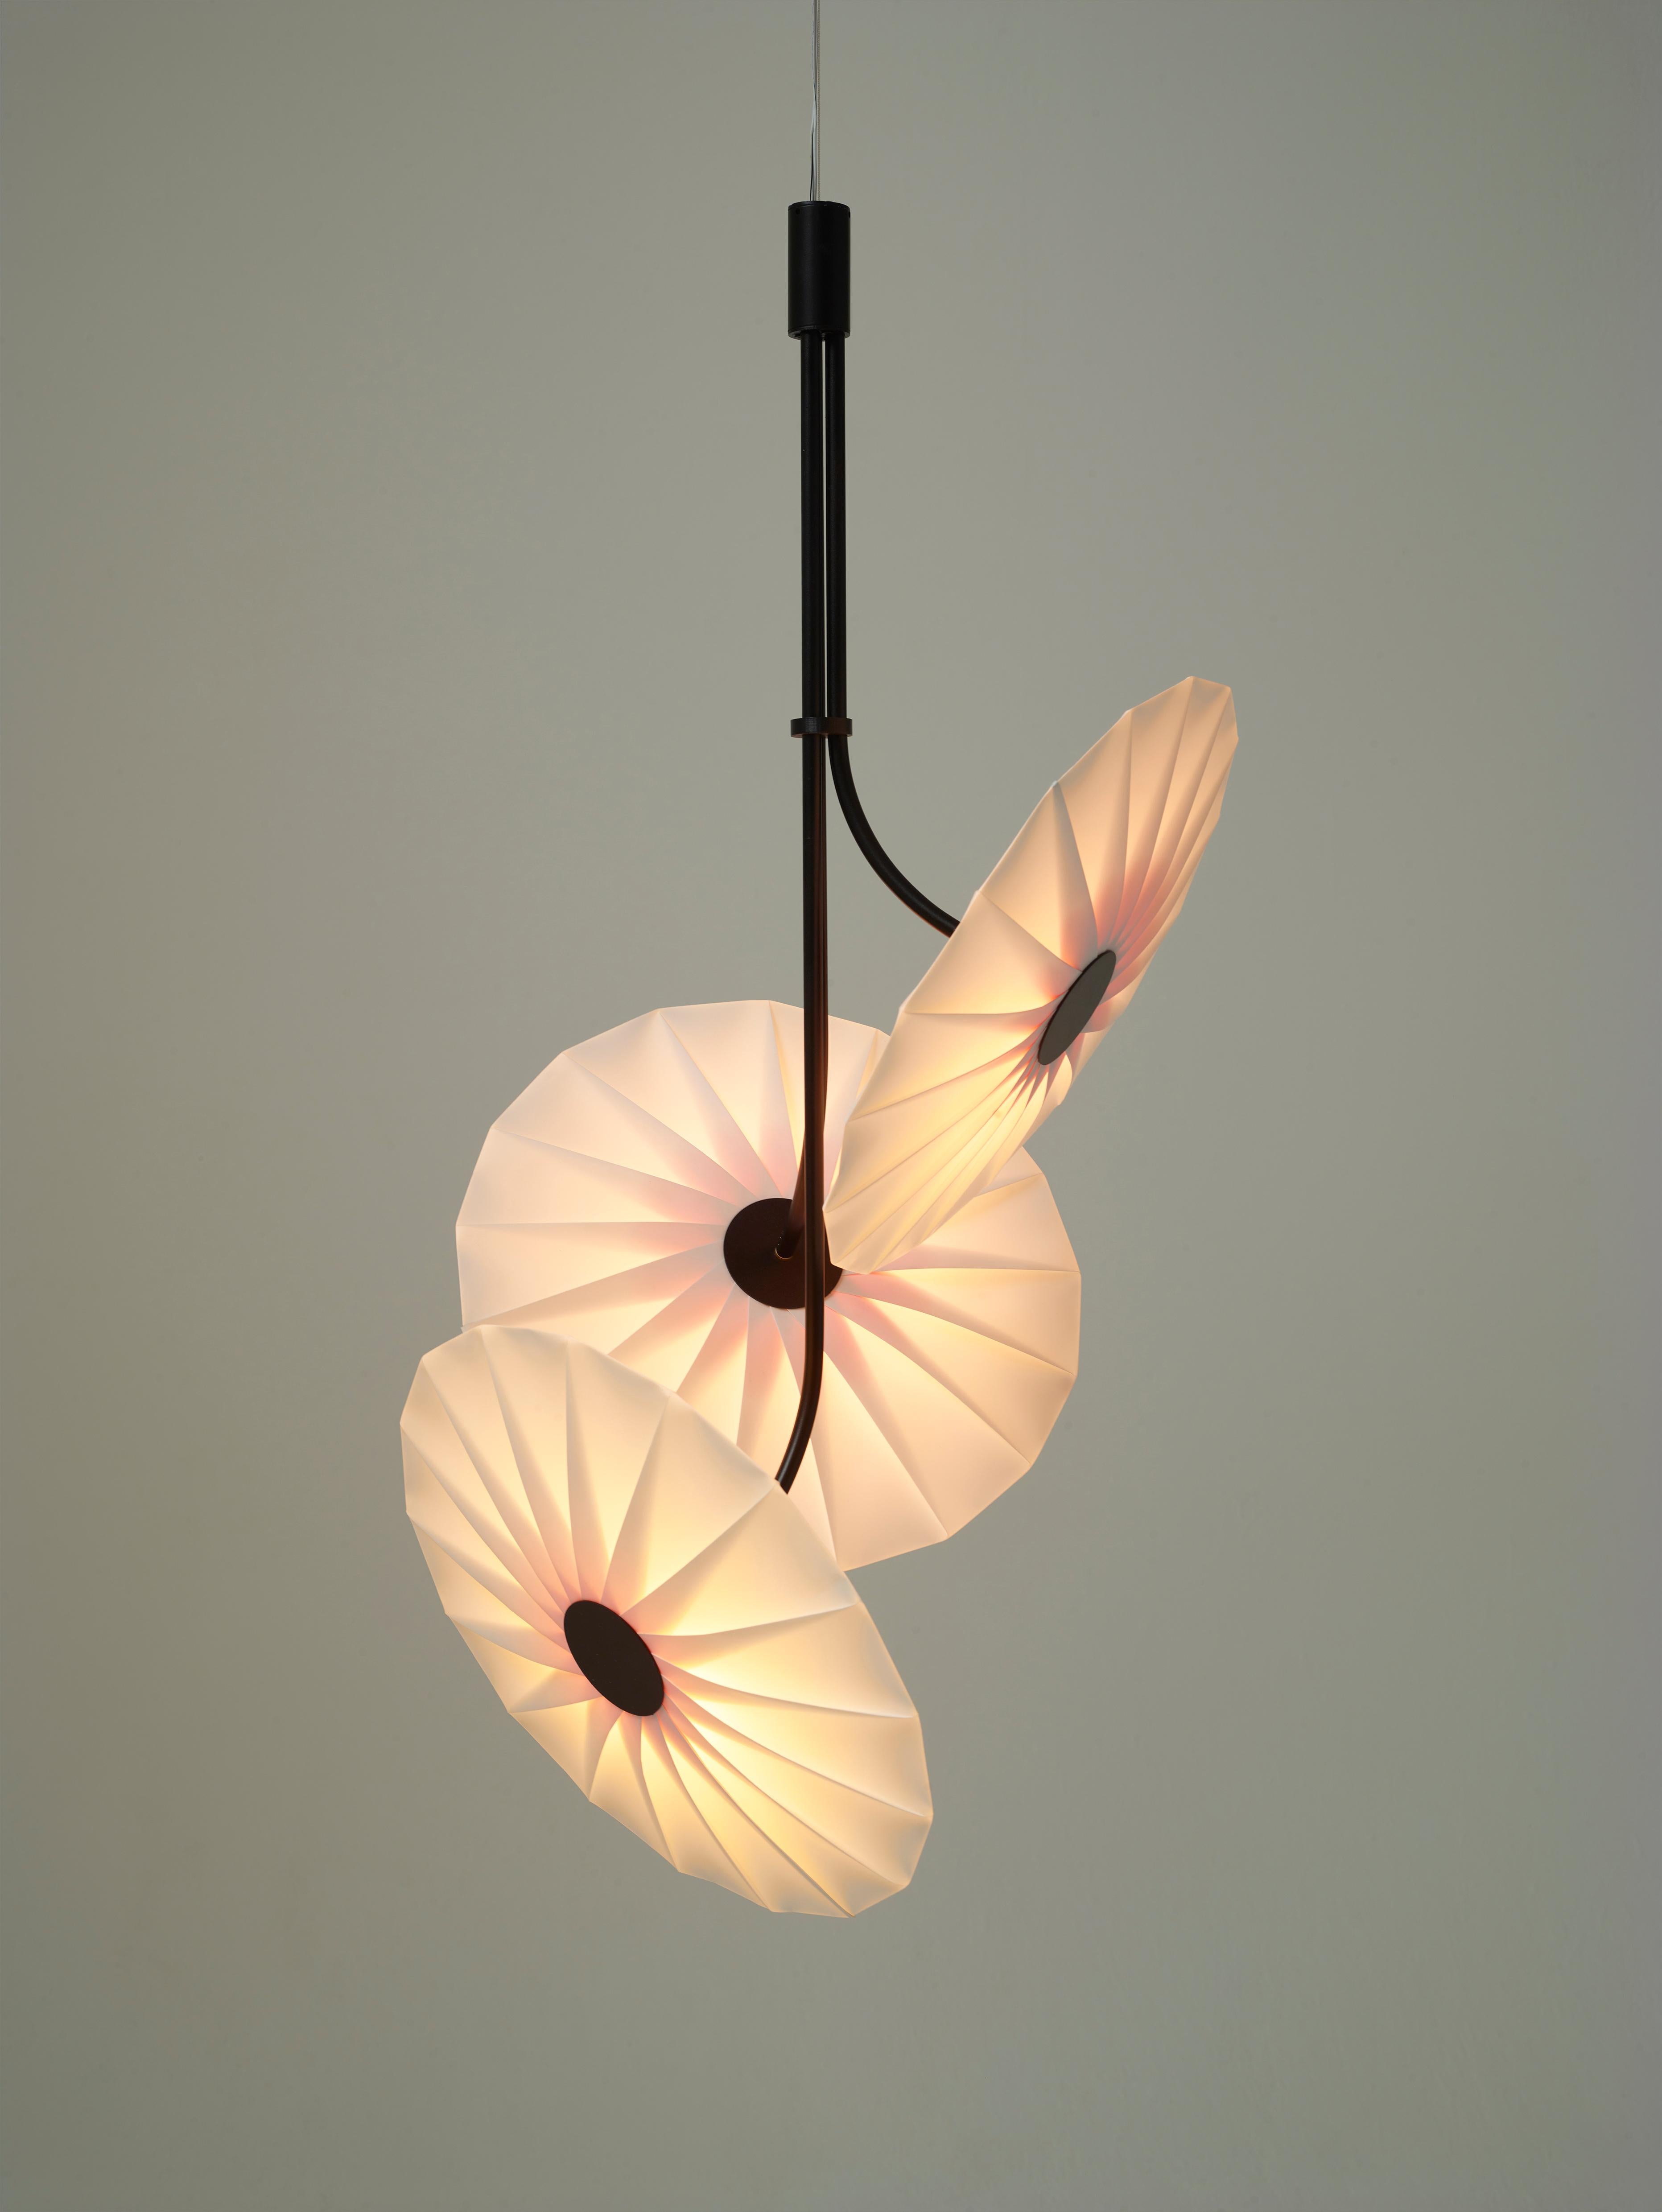 The Bloom lighting collection is designed by Studio Umut Yamac and handmade in their London studio. 

Taking inspiration from spring blossoms, the Bloom lights are a limited collection of hand crafted origami lights. Made from synthetic paper, both